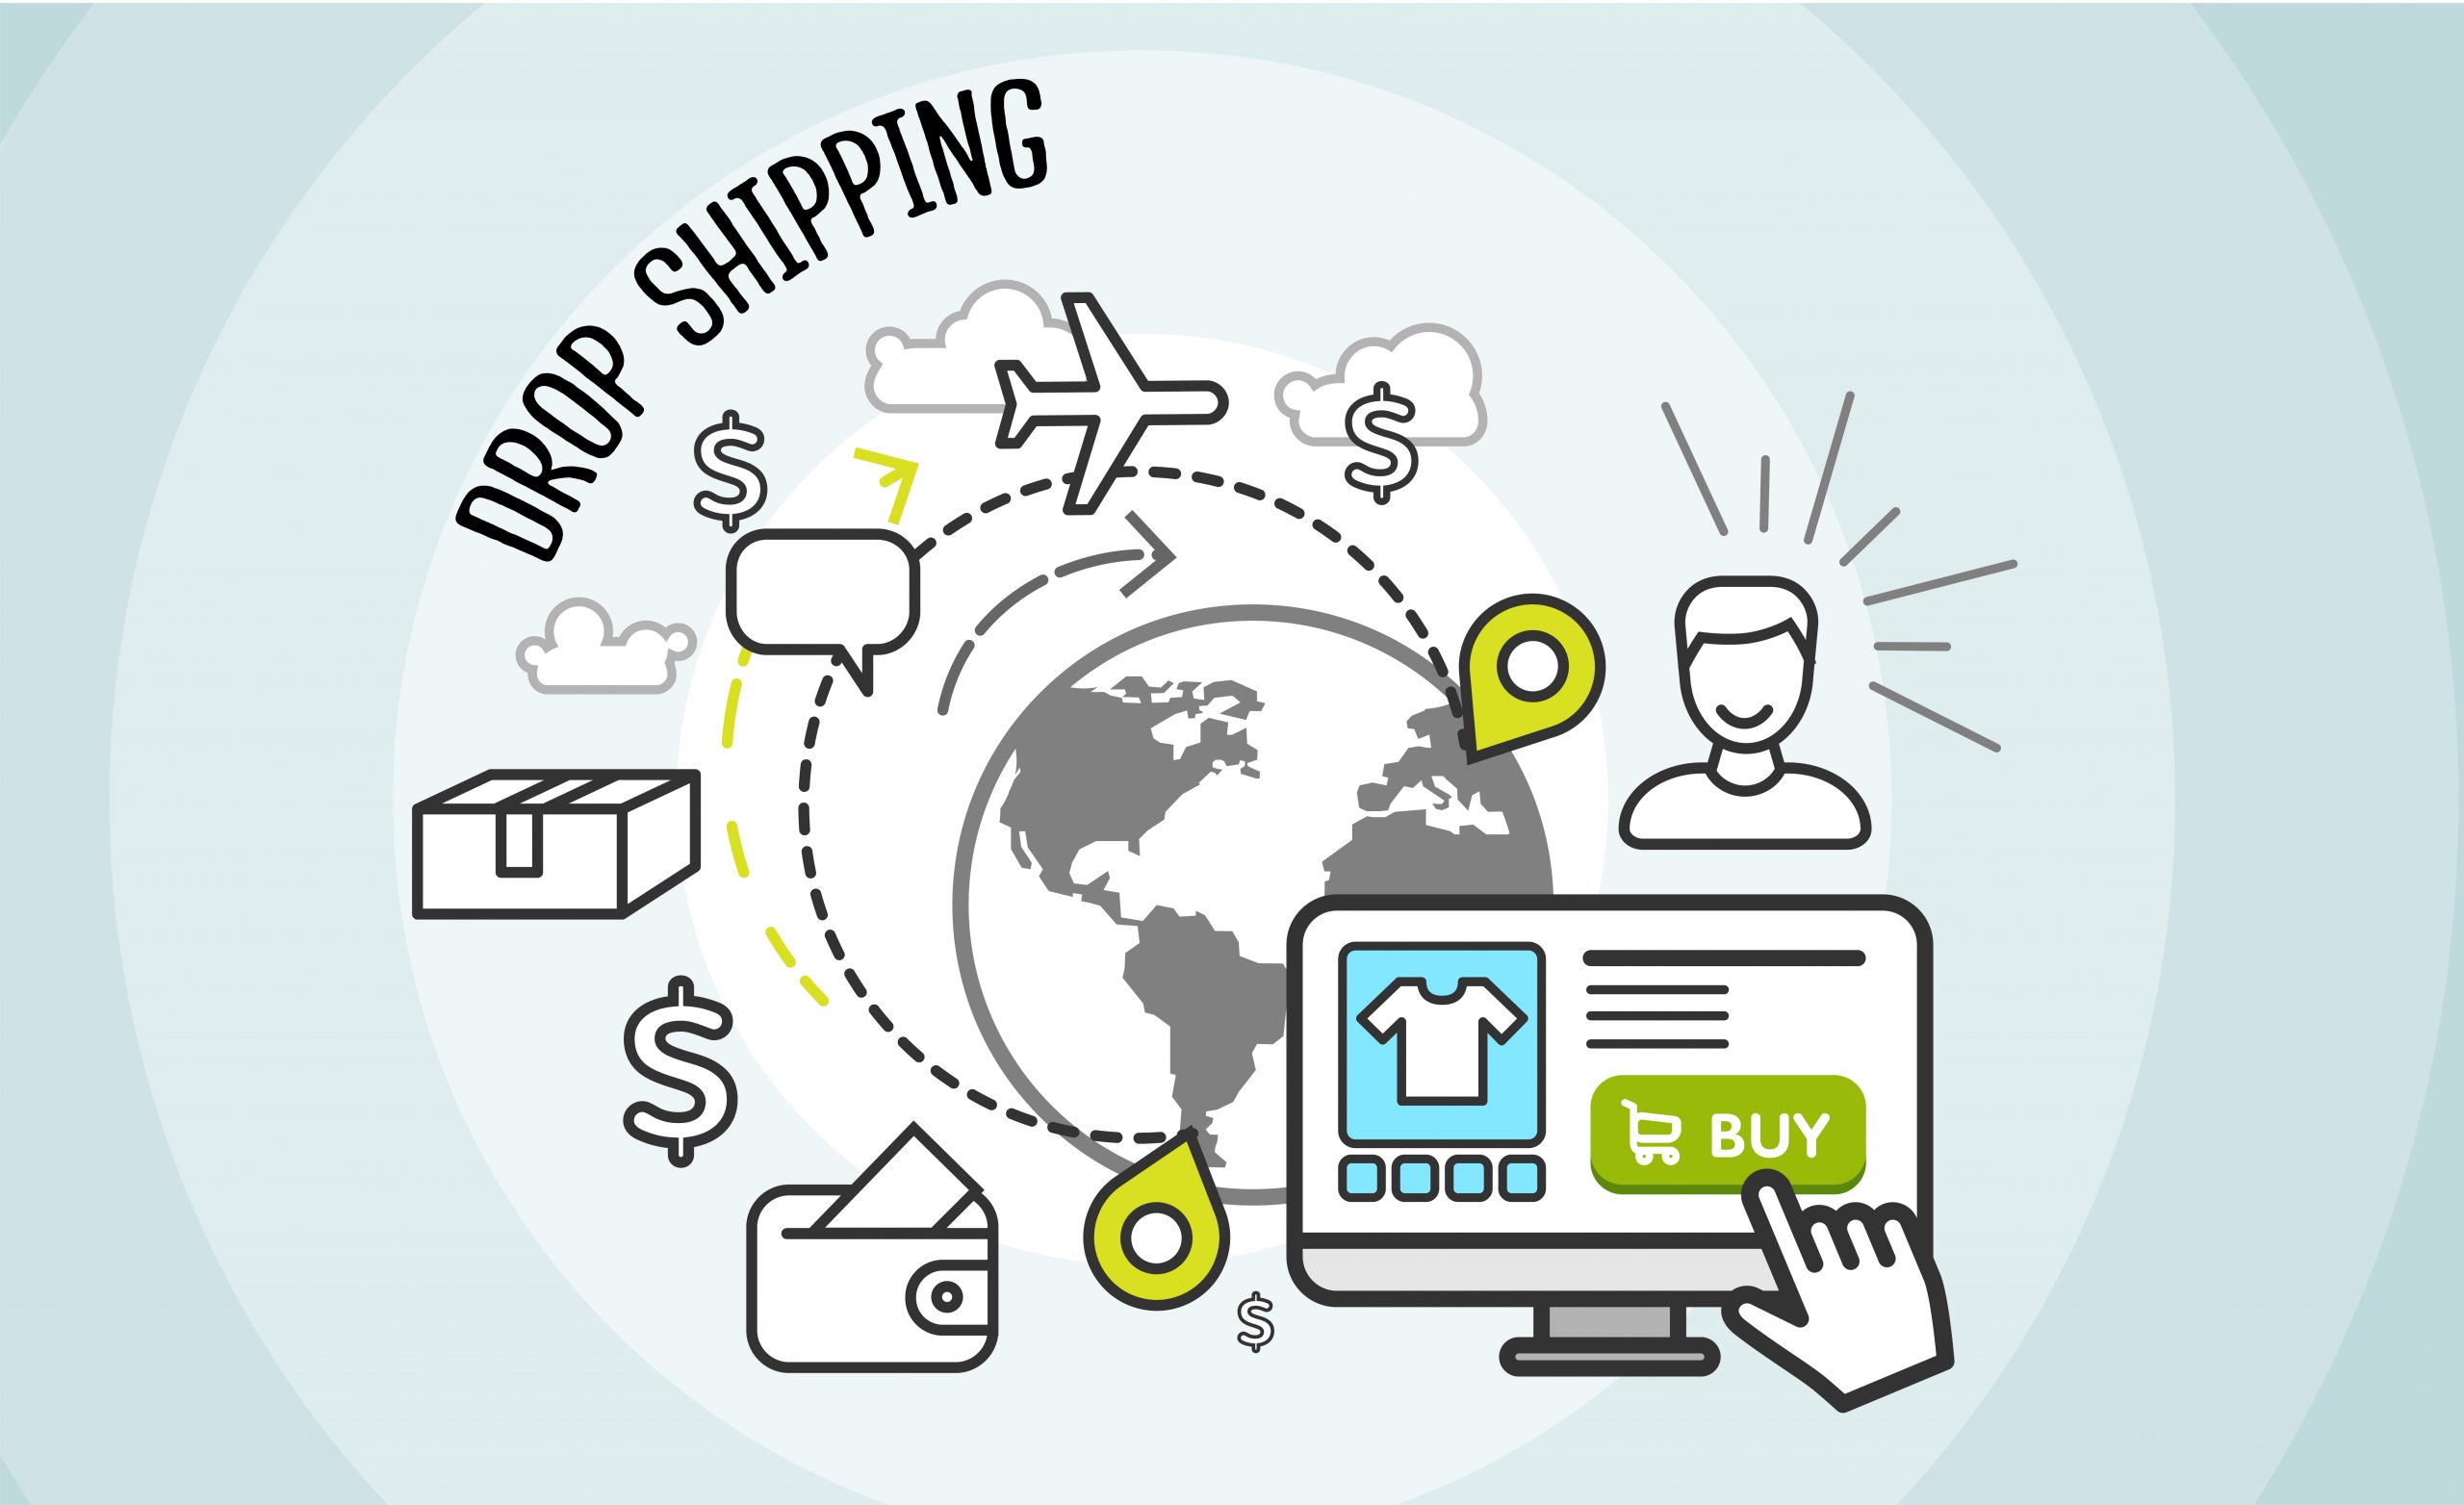 How To Make Money From Dropshipping Business?